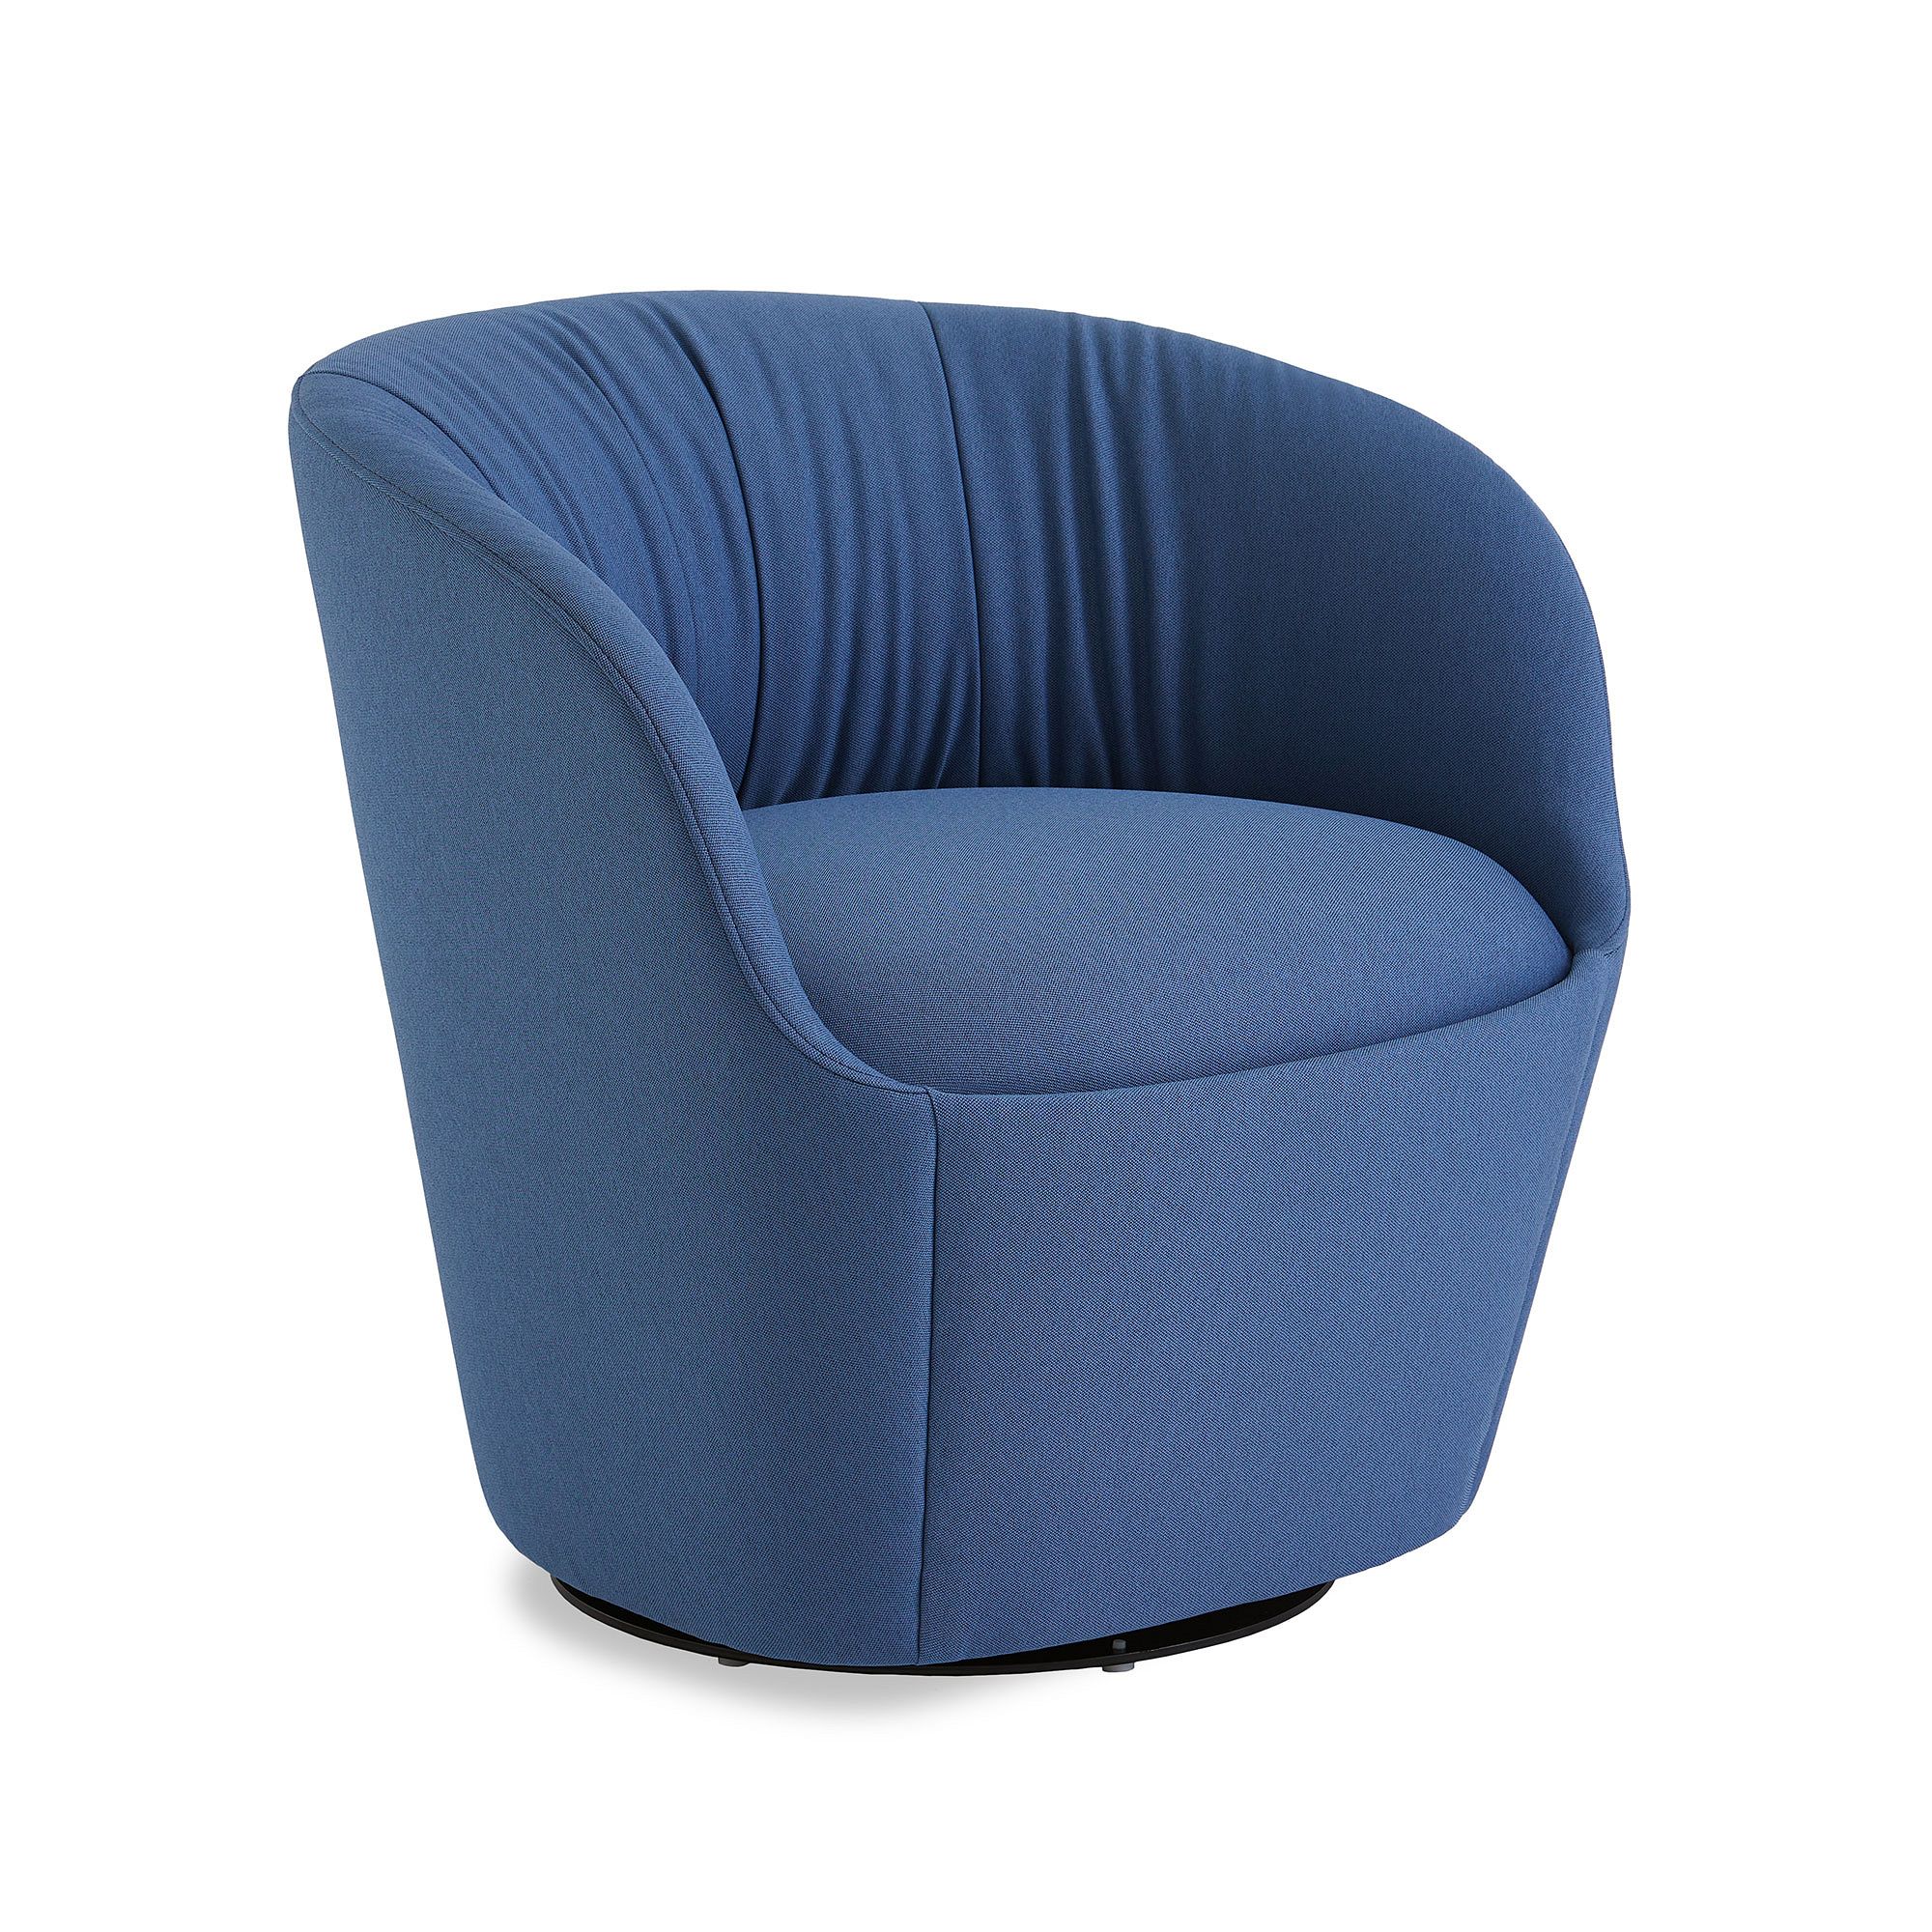 Steelcase Willow Lounge Chair | West Elm